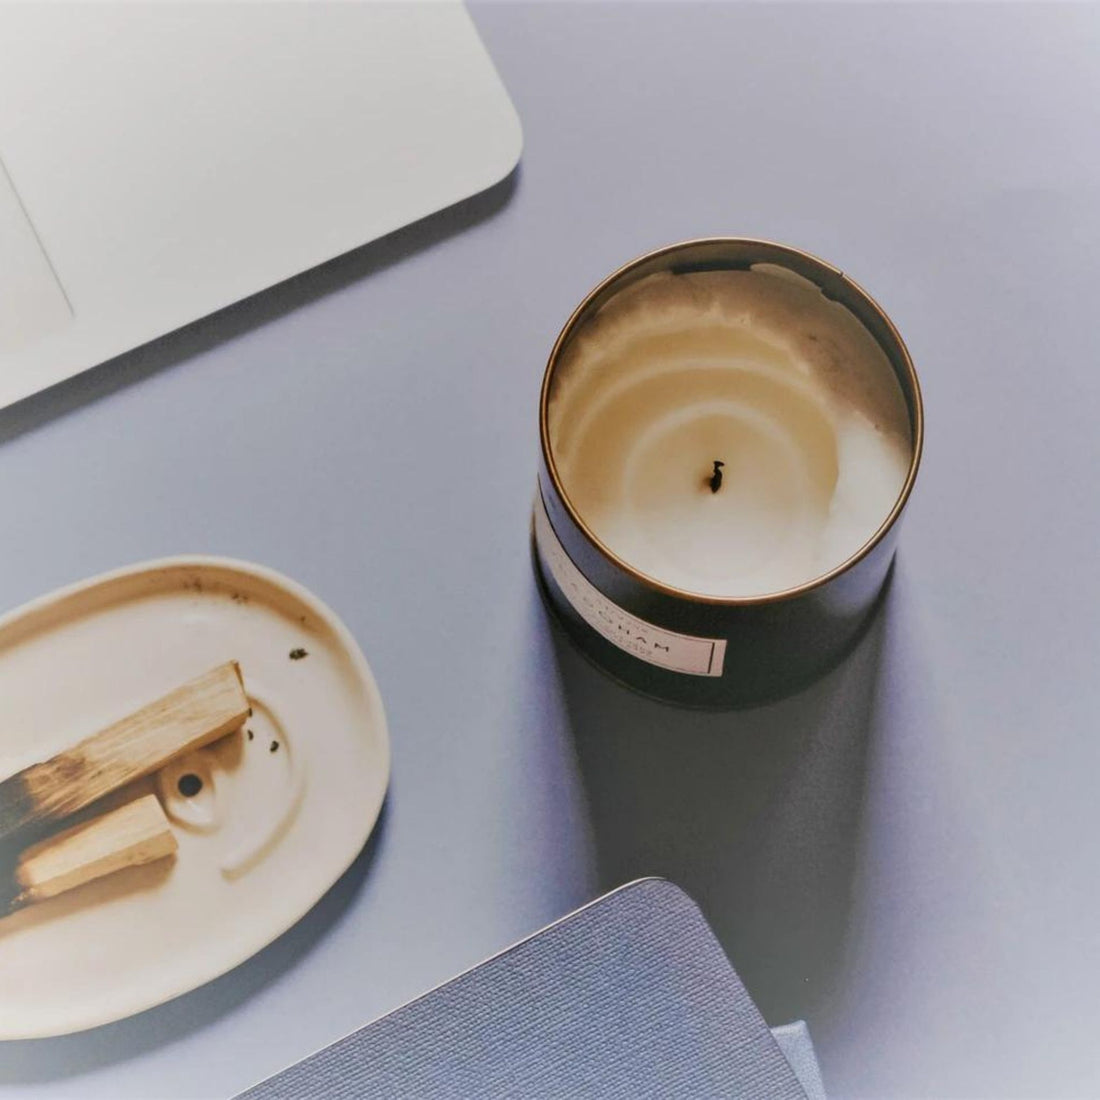 top view of a candle with tunneling next to lighting sticks and a notebook